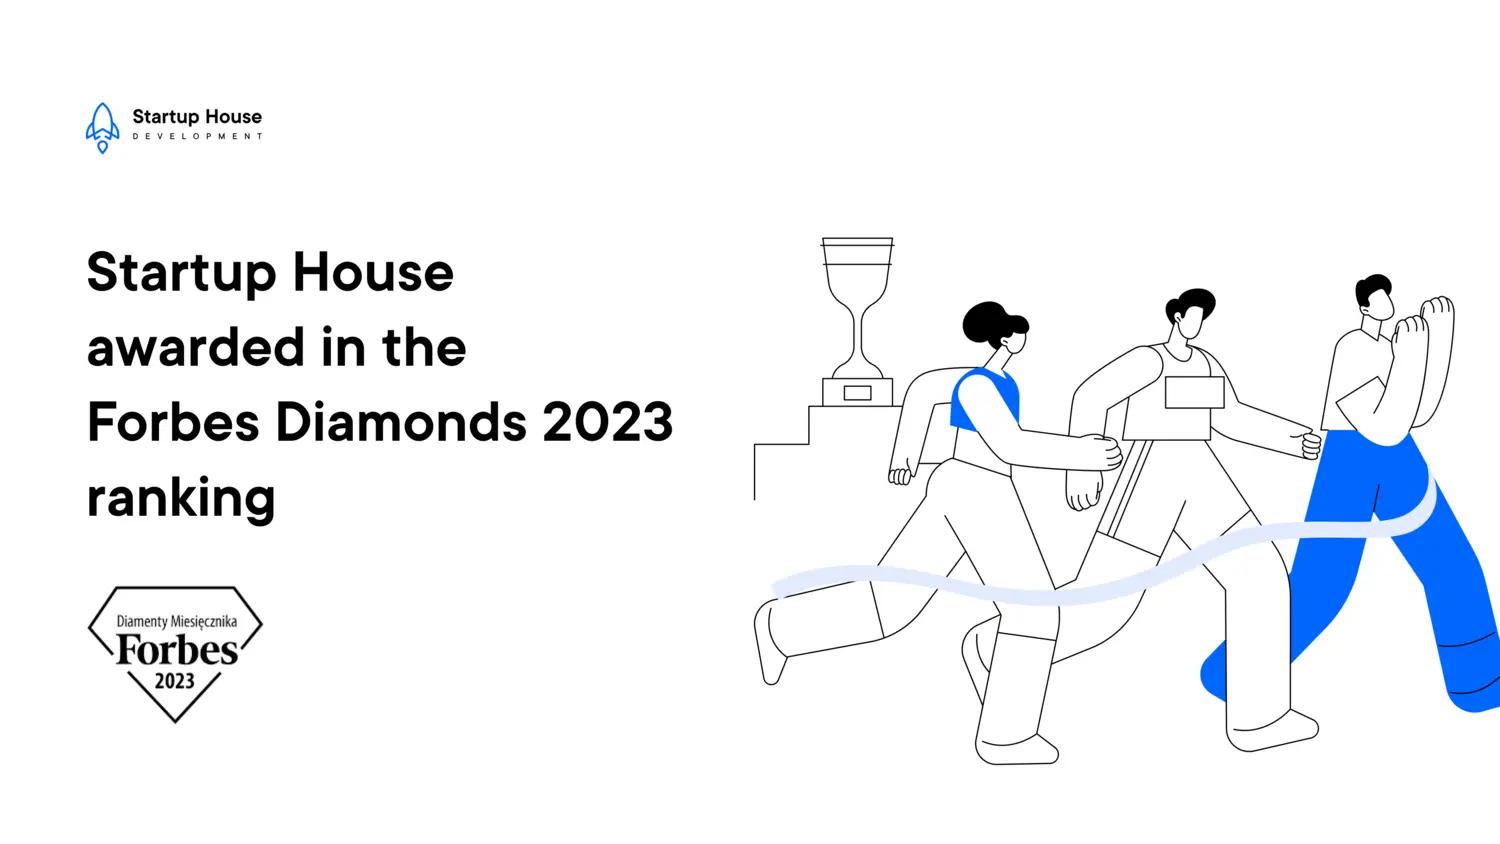 Startup House has been honoured with Forbes Diamonds 2023